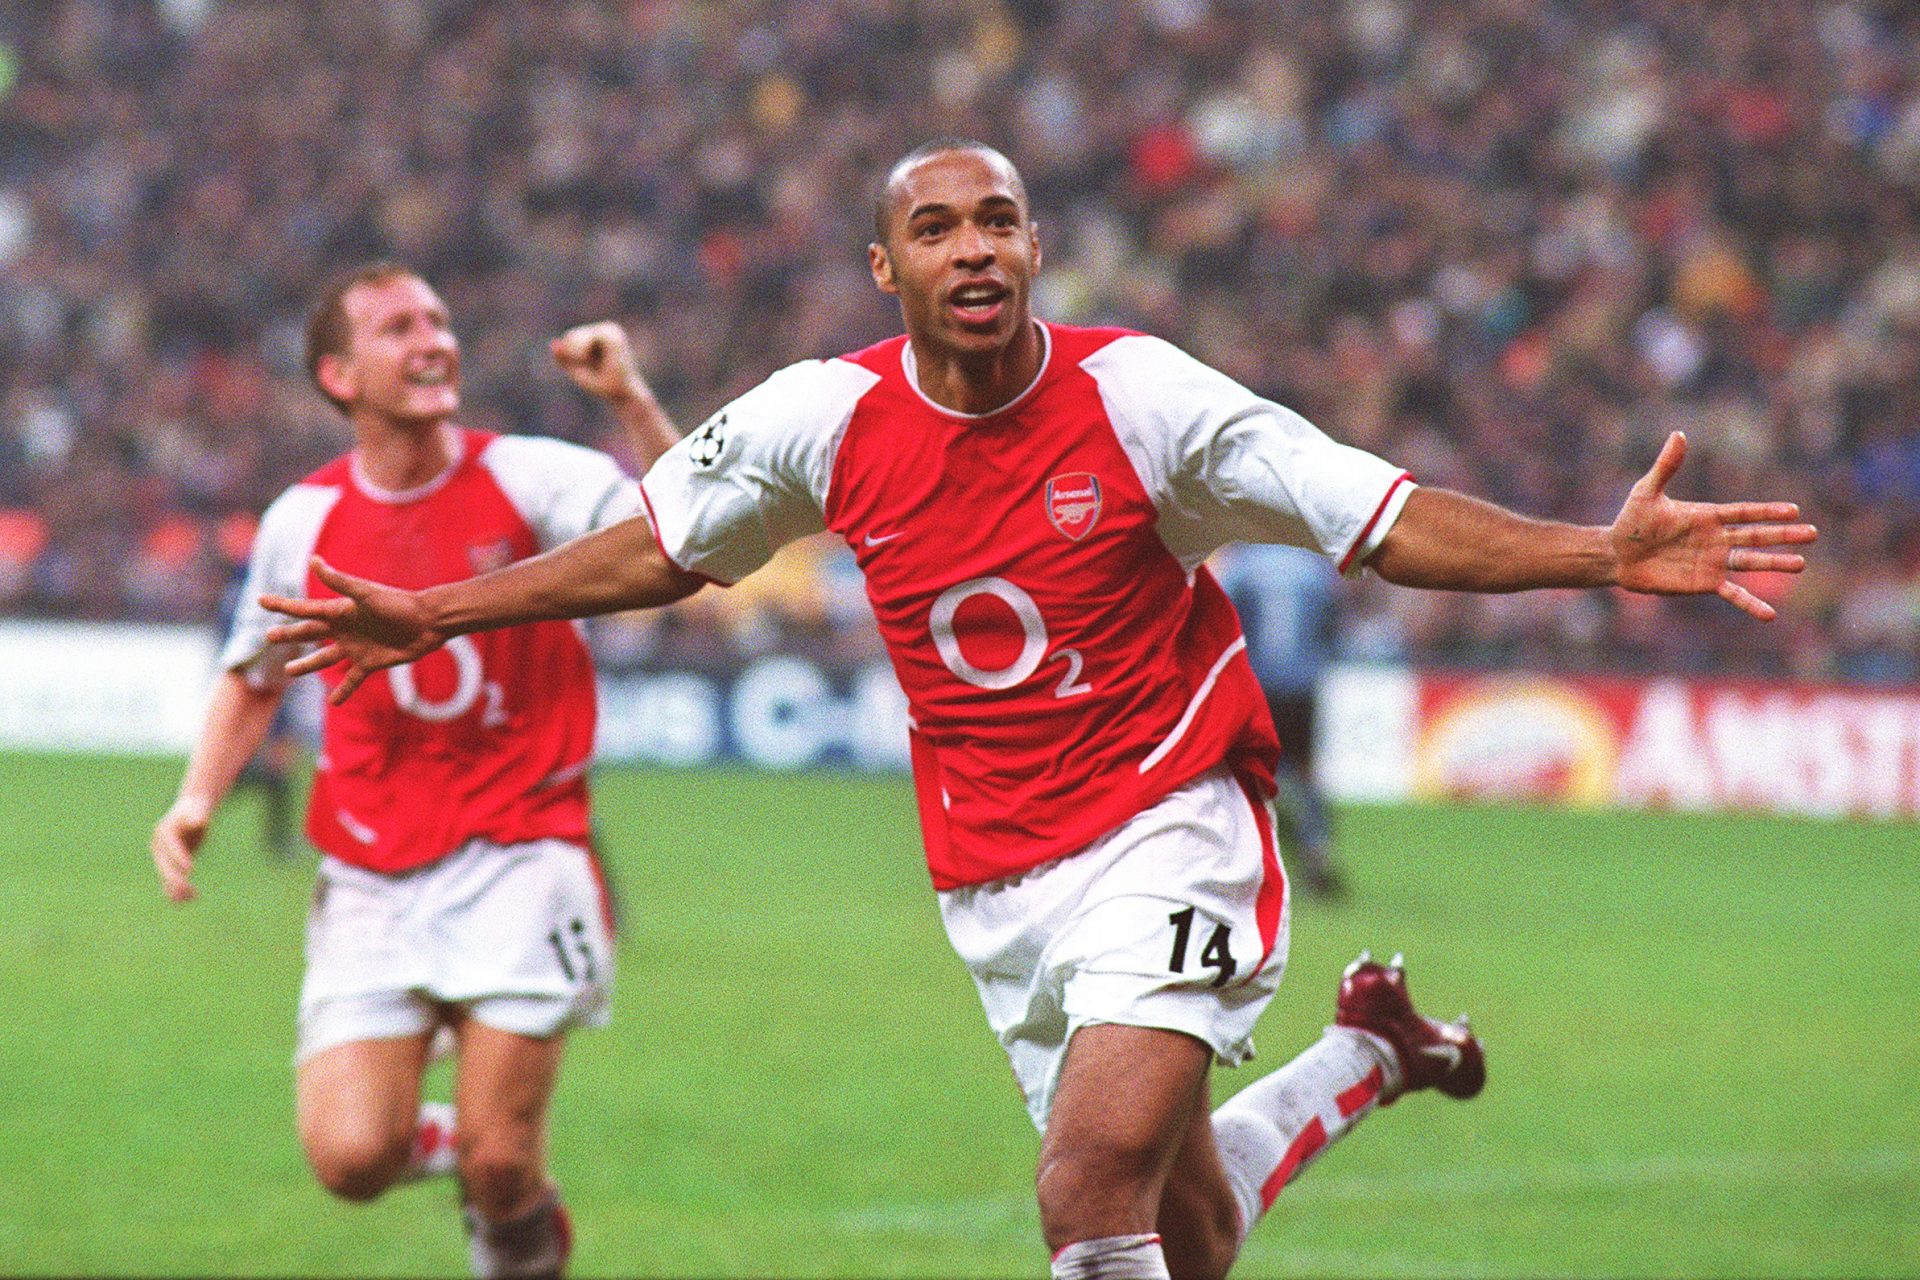 Thierry Henry (Arsenal) 